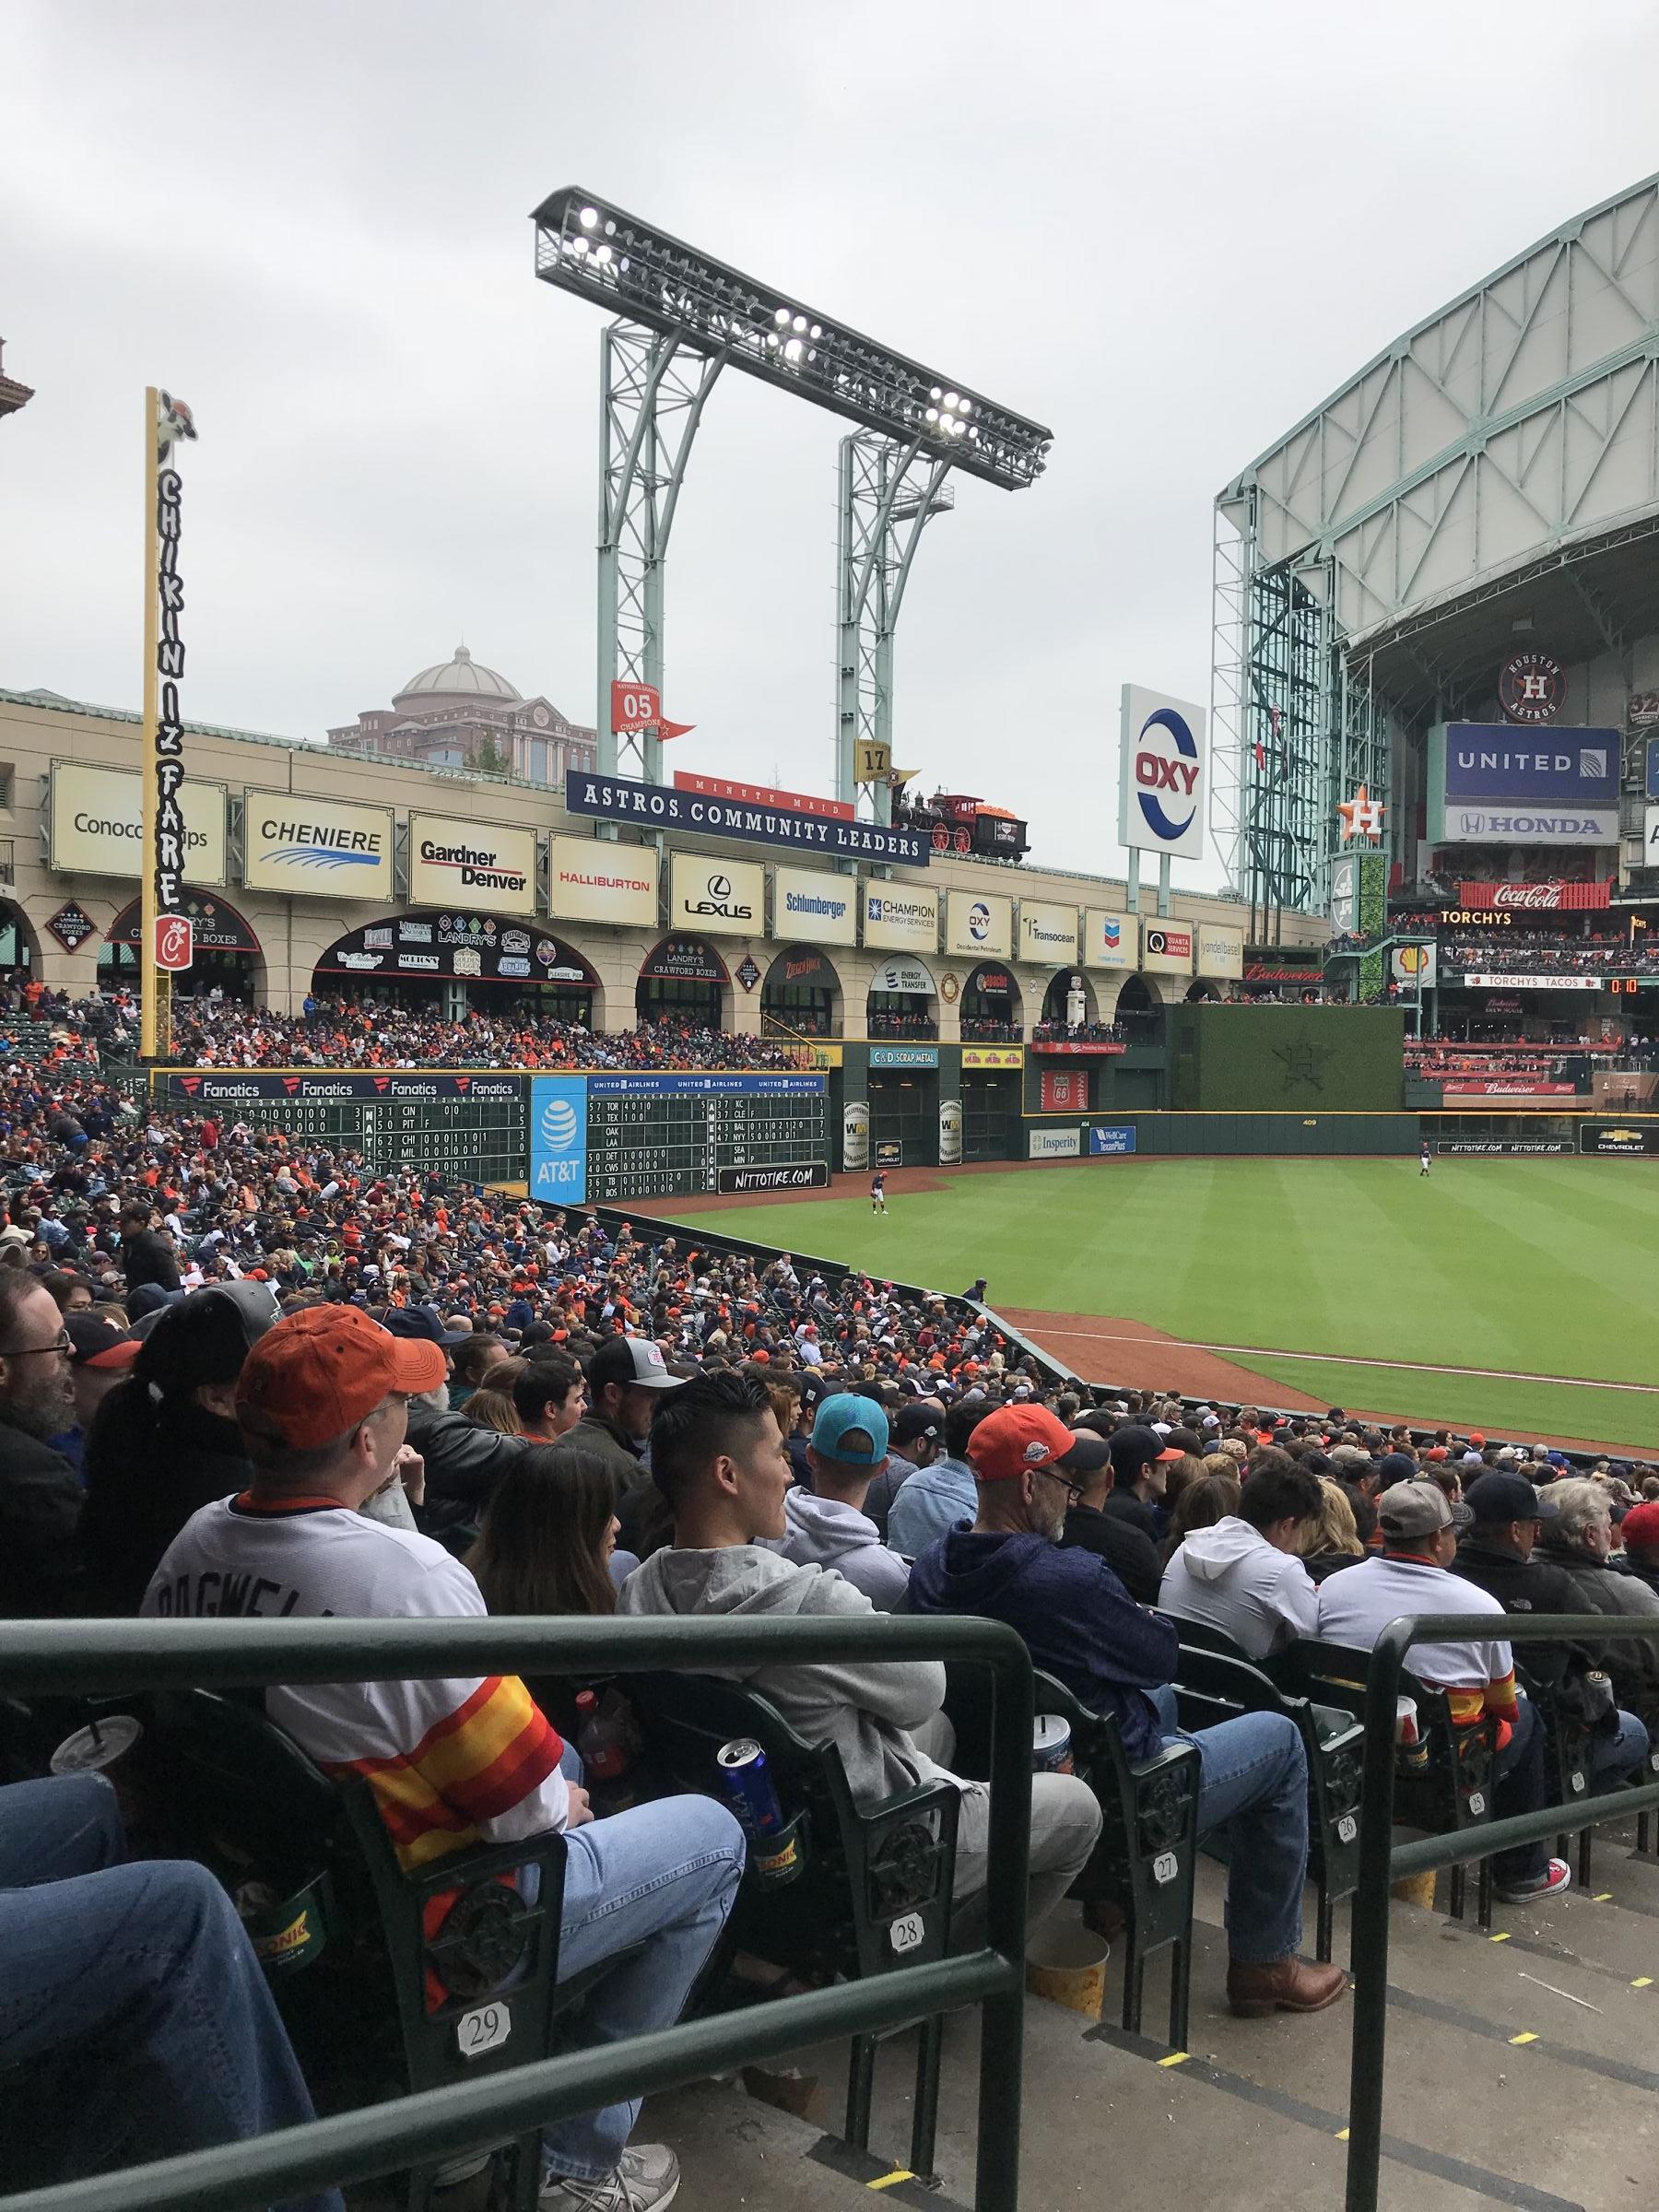 A view of Minute Maid Park from the left field upper deck section